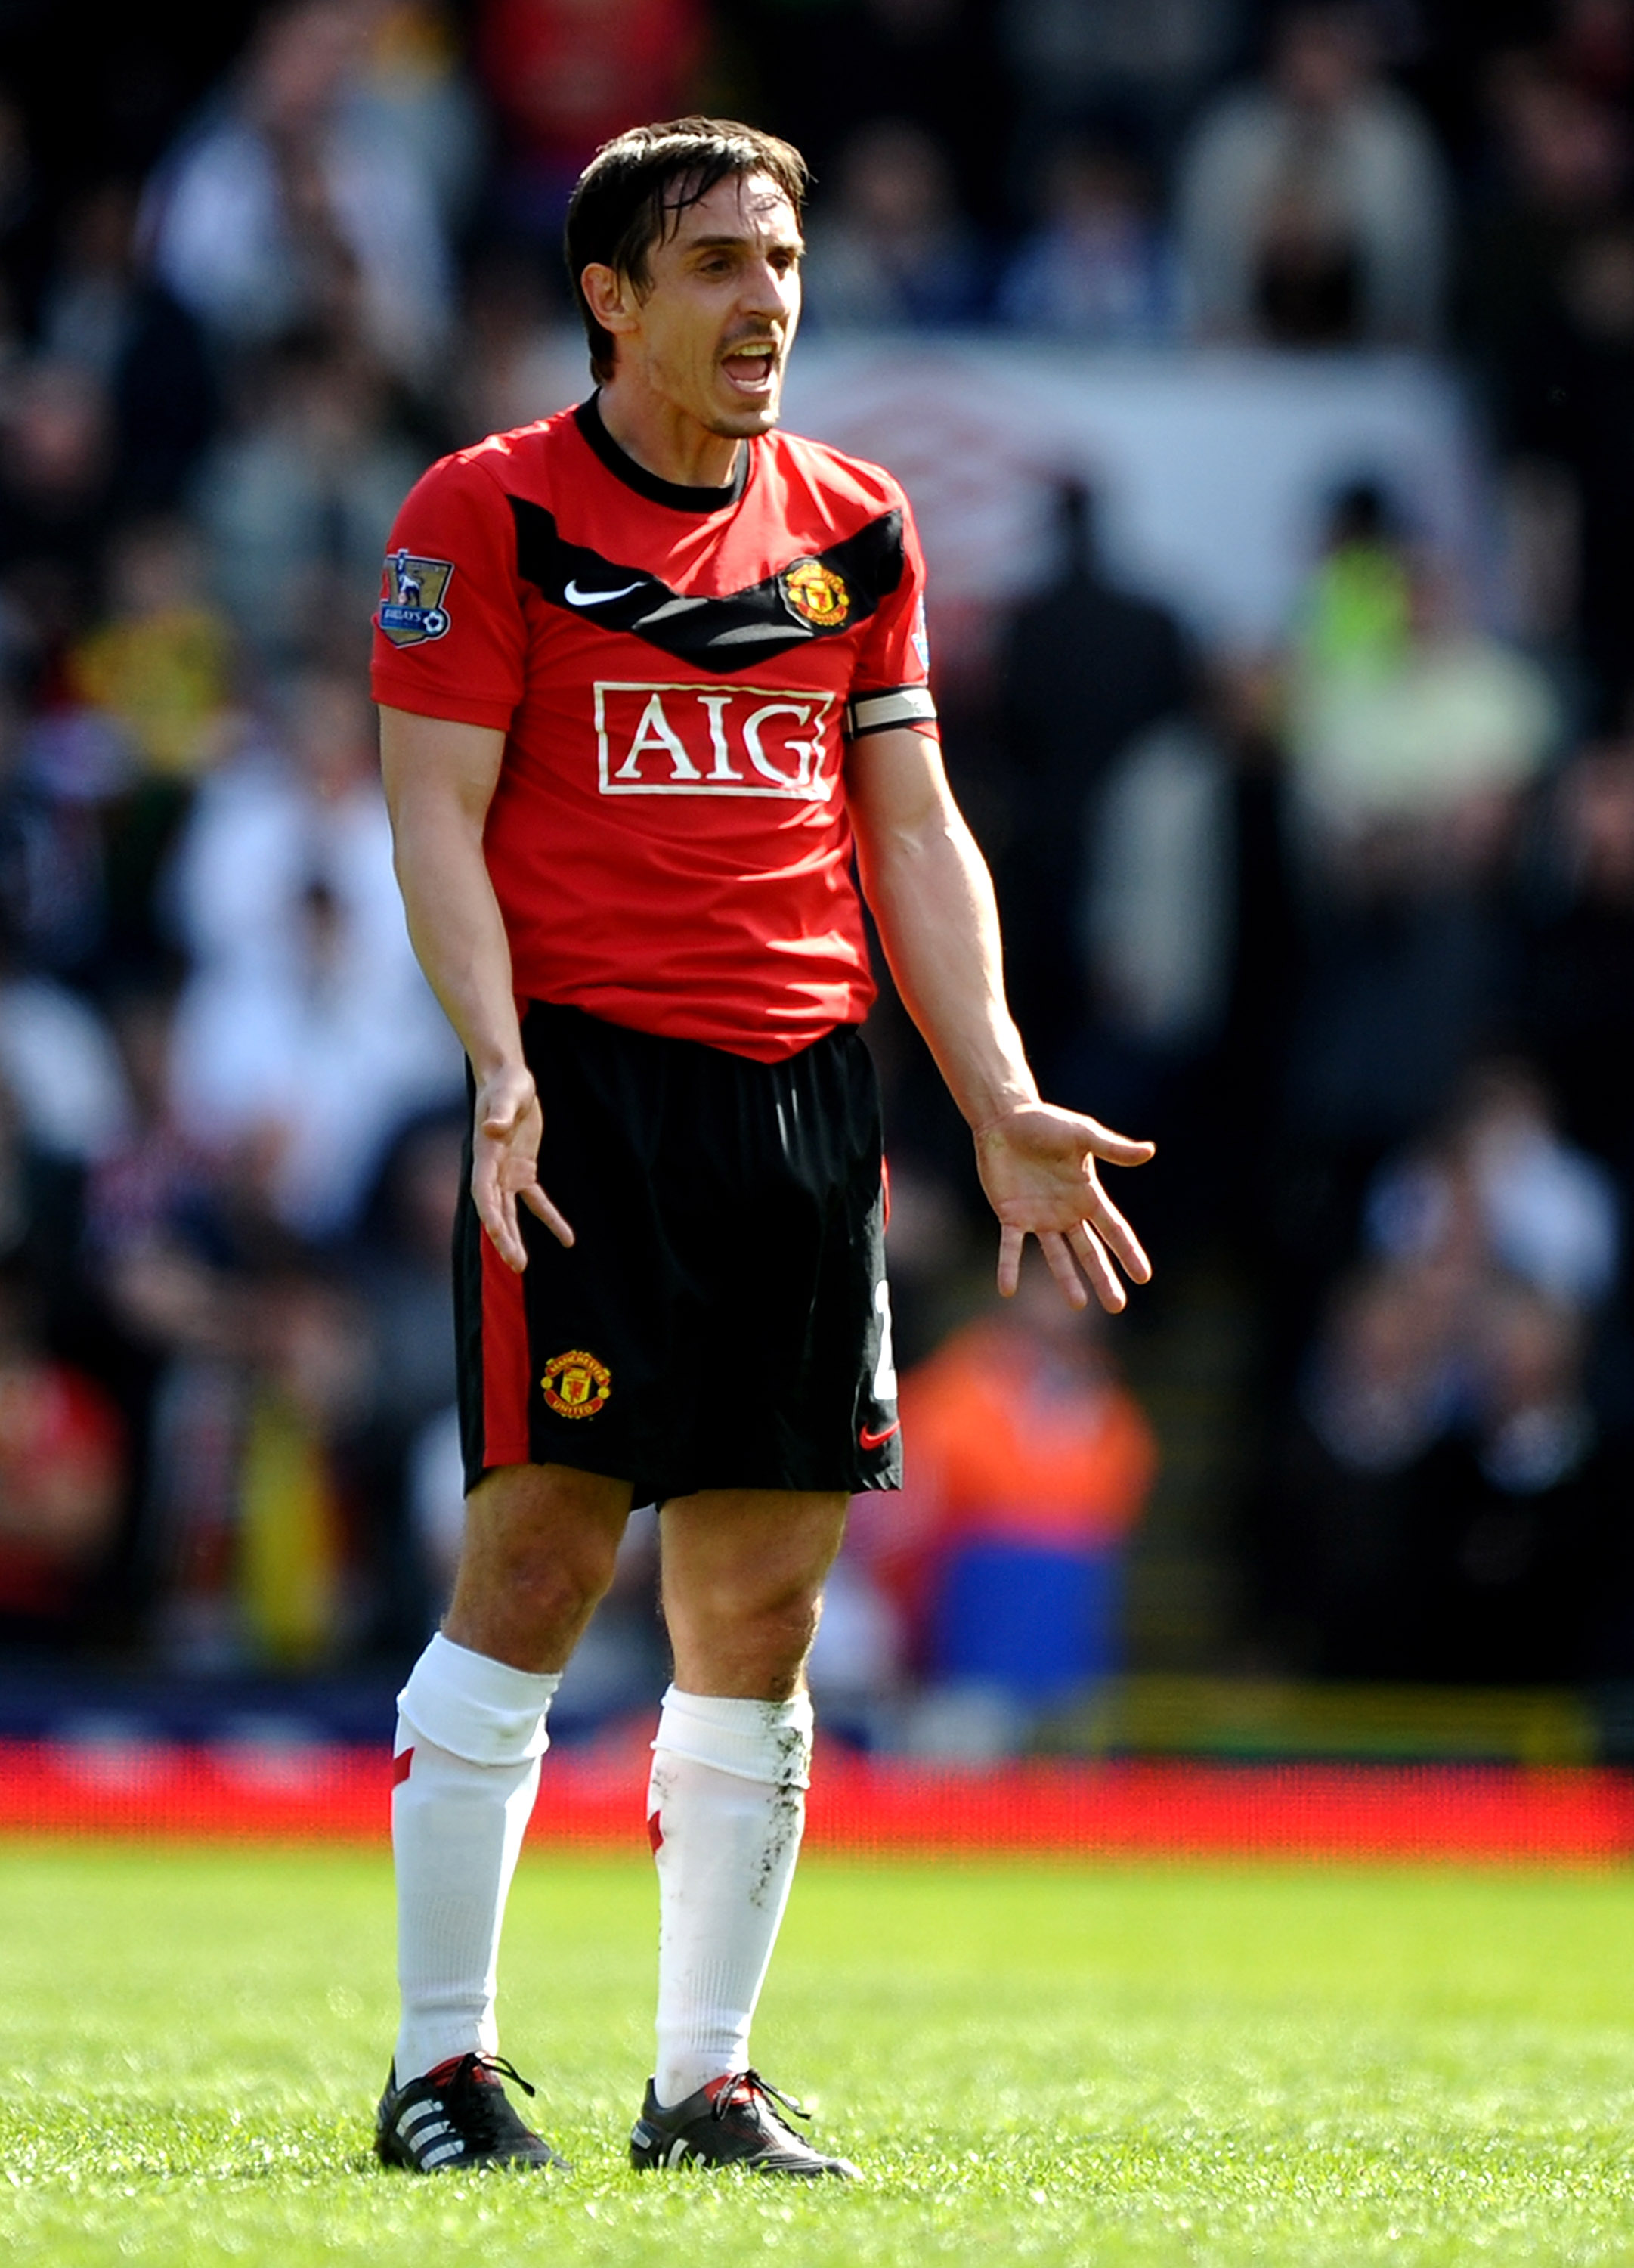 BLACKBURN, ENGLAND - APRIL 11: Gary Neville of Manchester United shows his dissapointment after dropping points in the Barclays Premier League Match between Blackburn Rovers and Manchester United at Ewood Park on April 11, 2010 in Blackburn, England.  (Ph